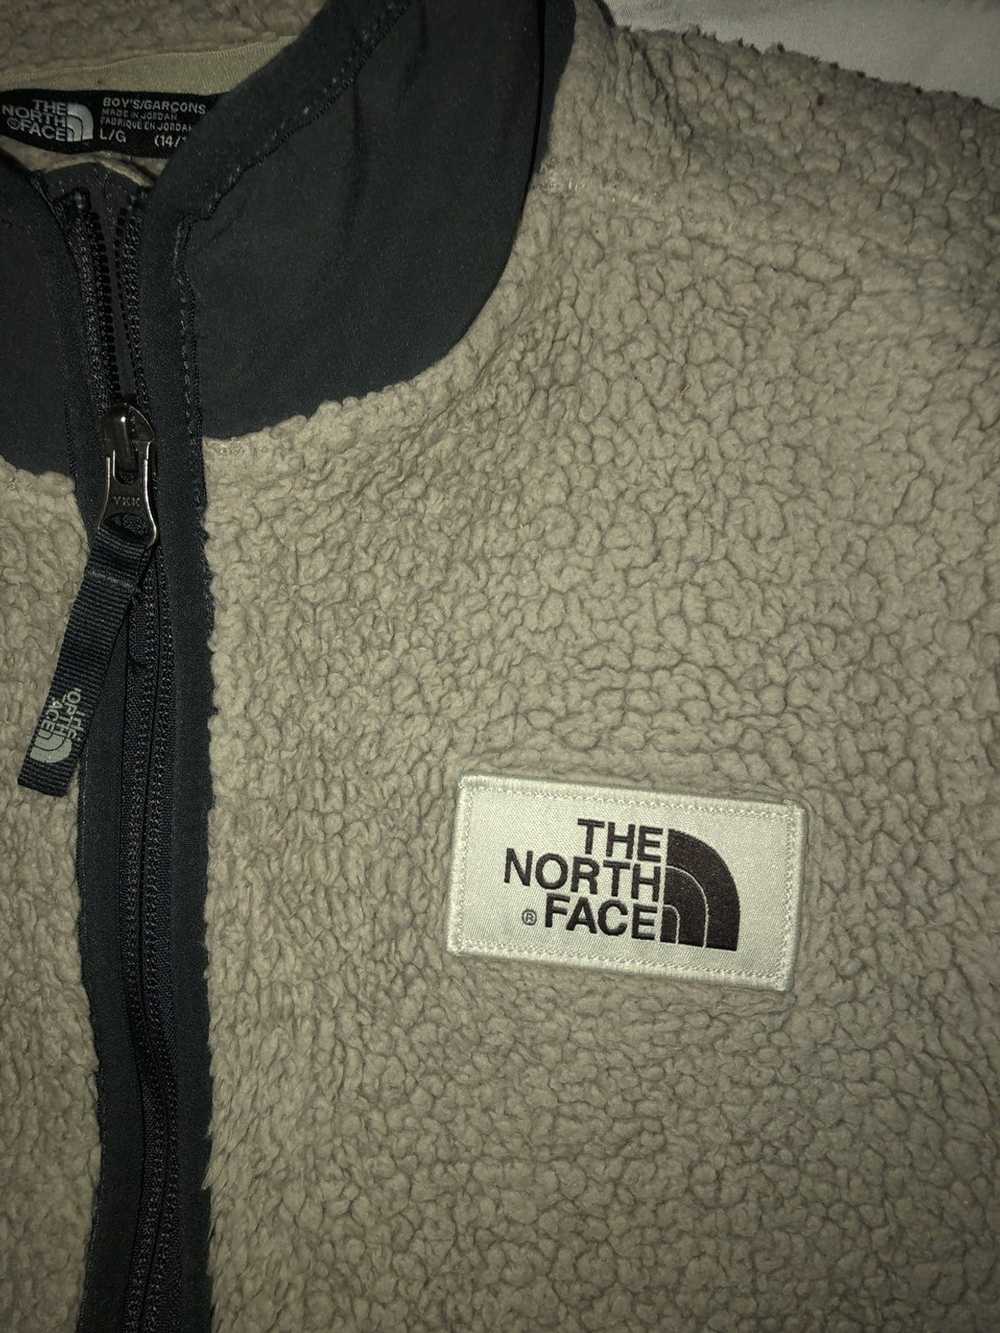 The North Face CAMPSHIRE FULL ZIP SHERPA FLEECE - image 9